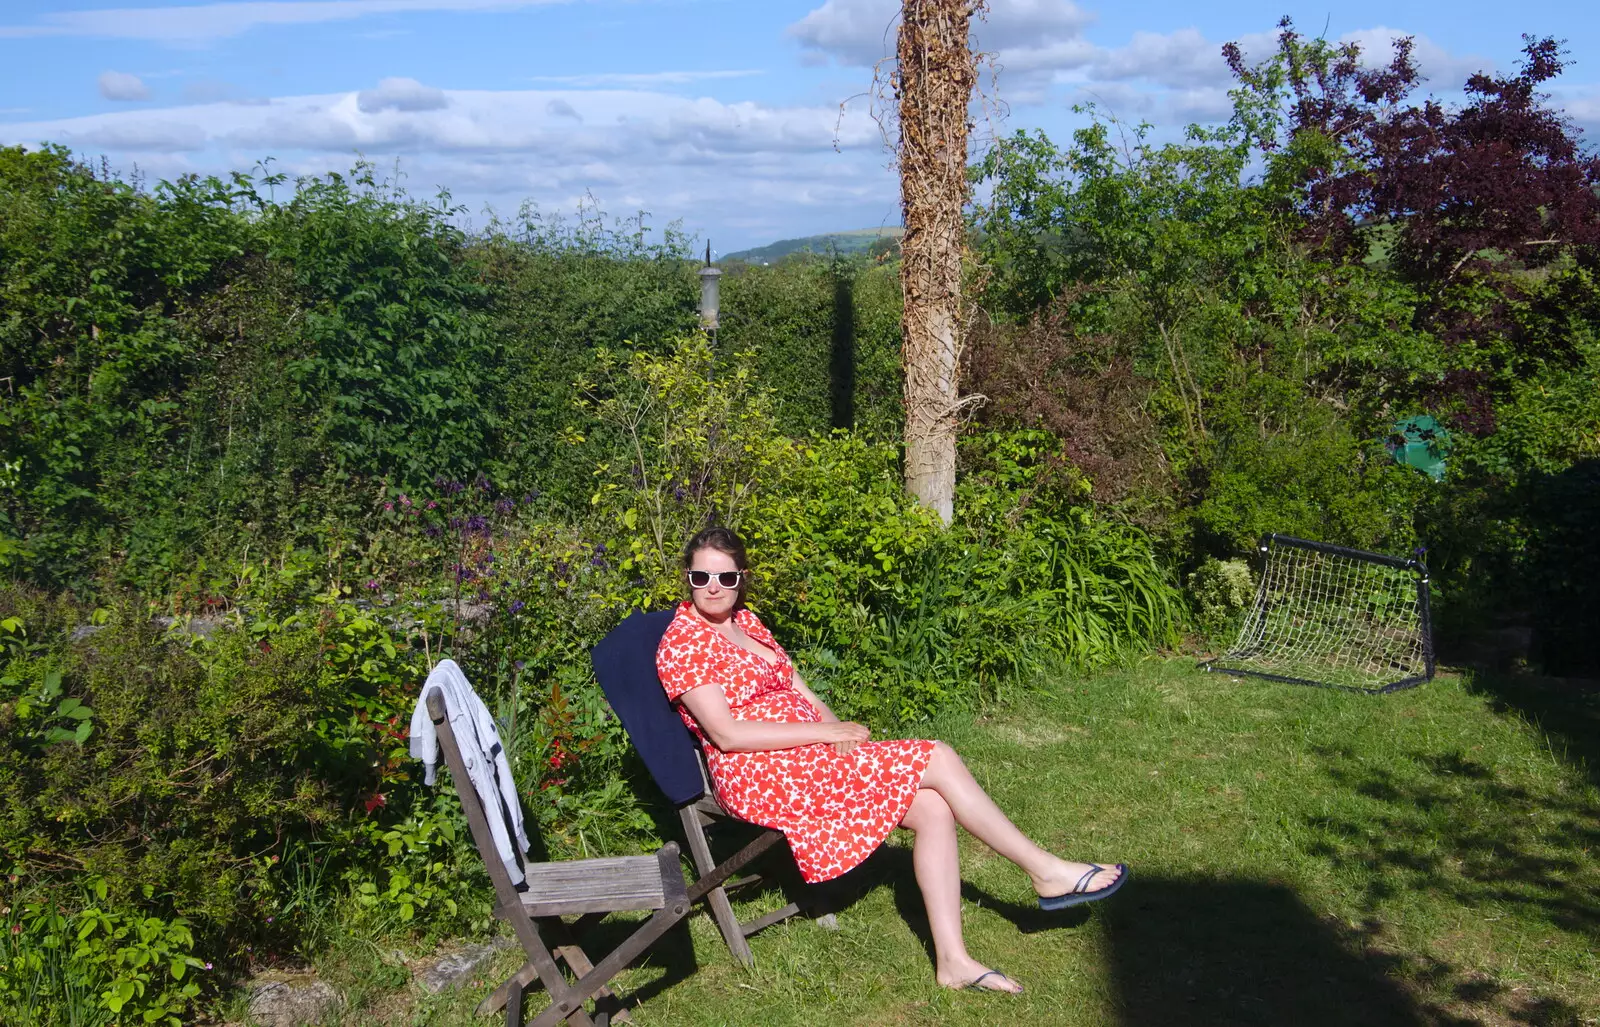 Isobel in Matt and Sis's back garden, from Chagford Lido and a Trip to Parke, Bovey Tracey, Devon - 25th May 2019